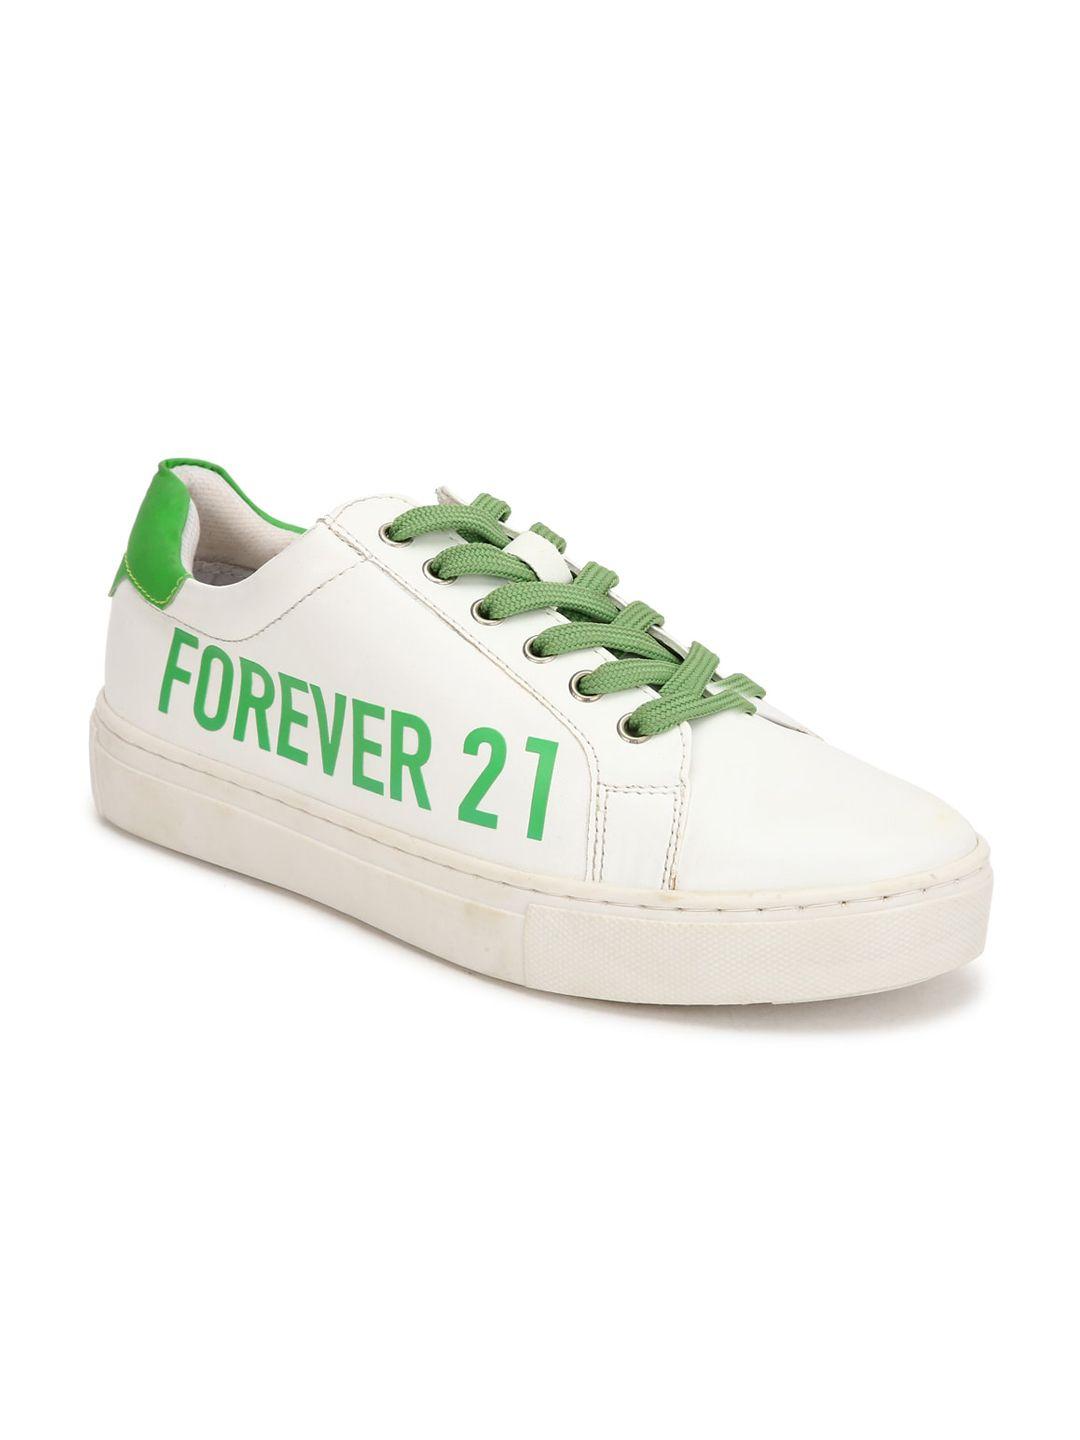 forever 21 women white printed pu sneakers